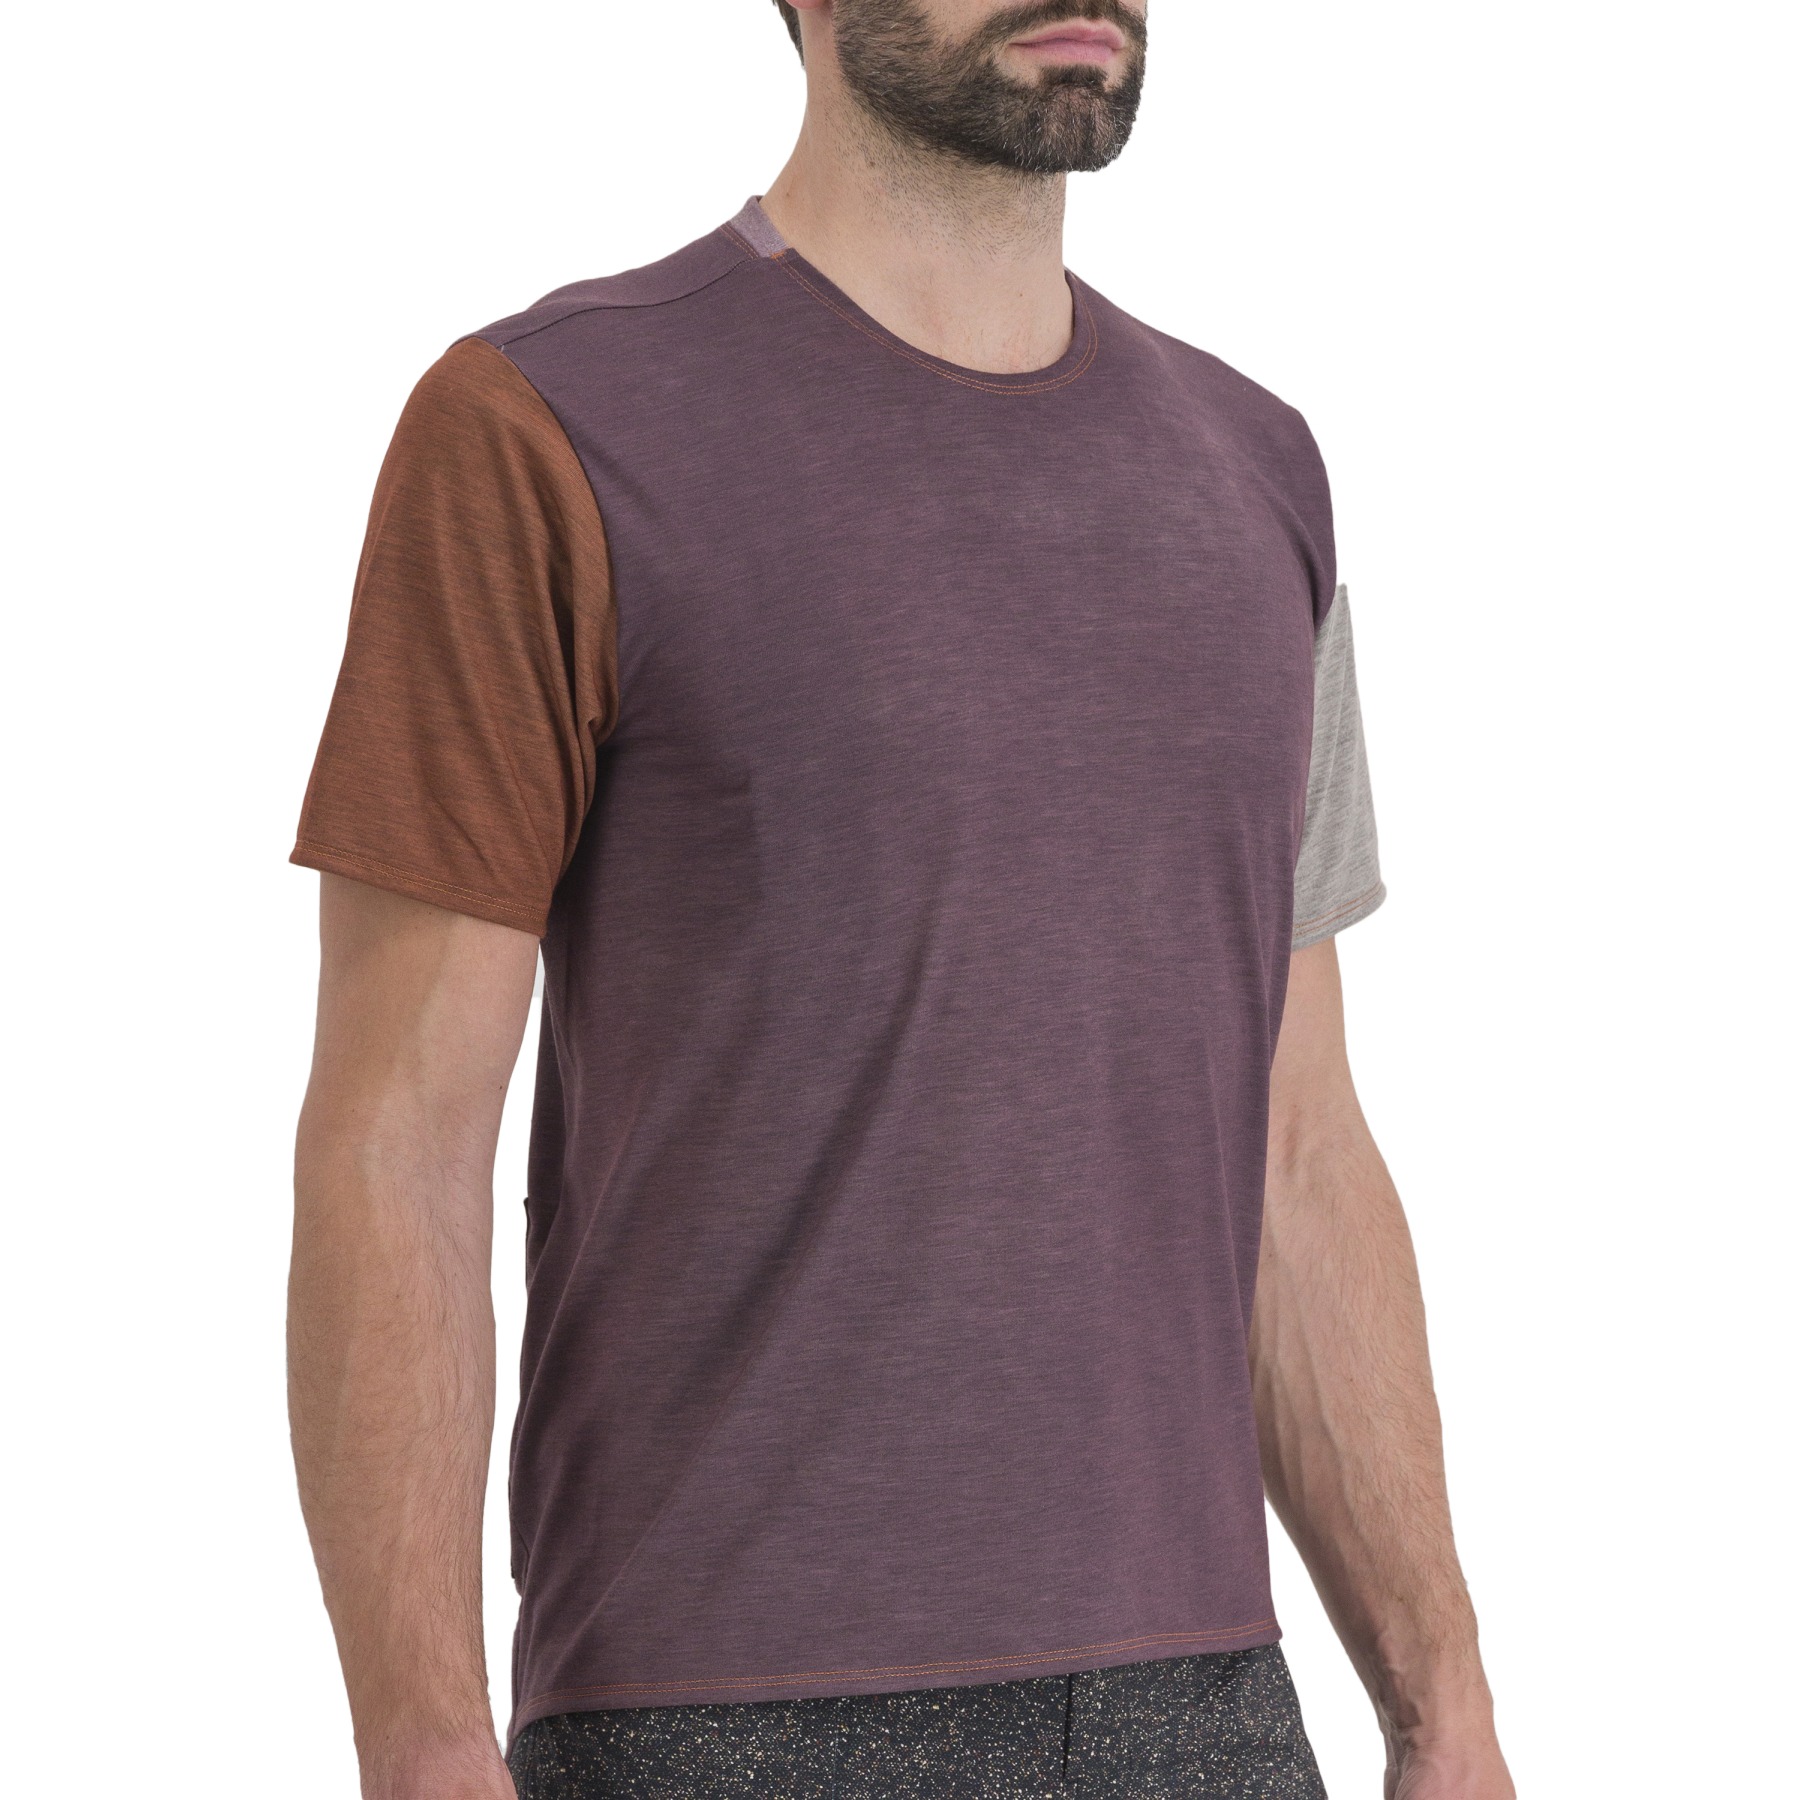 Picture of Sportful Sky Rider Giara Tee - 623 Huckleberry